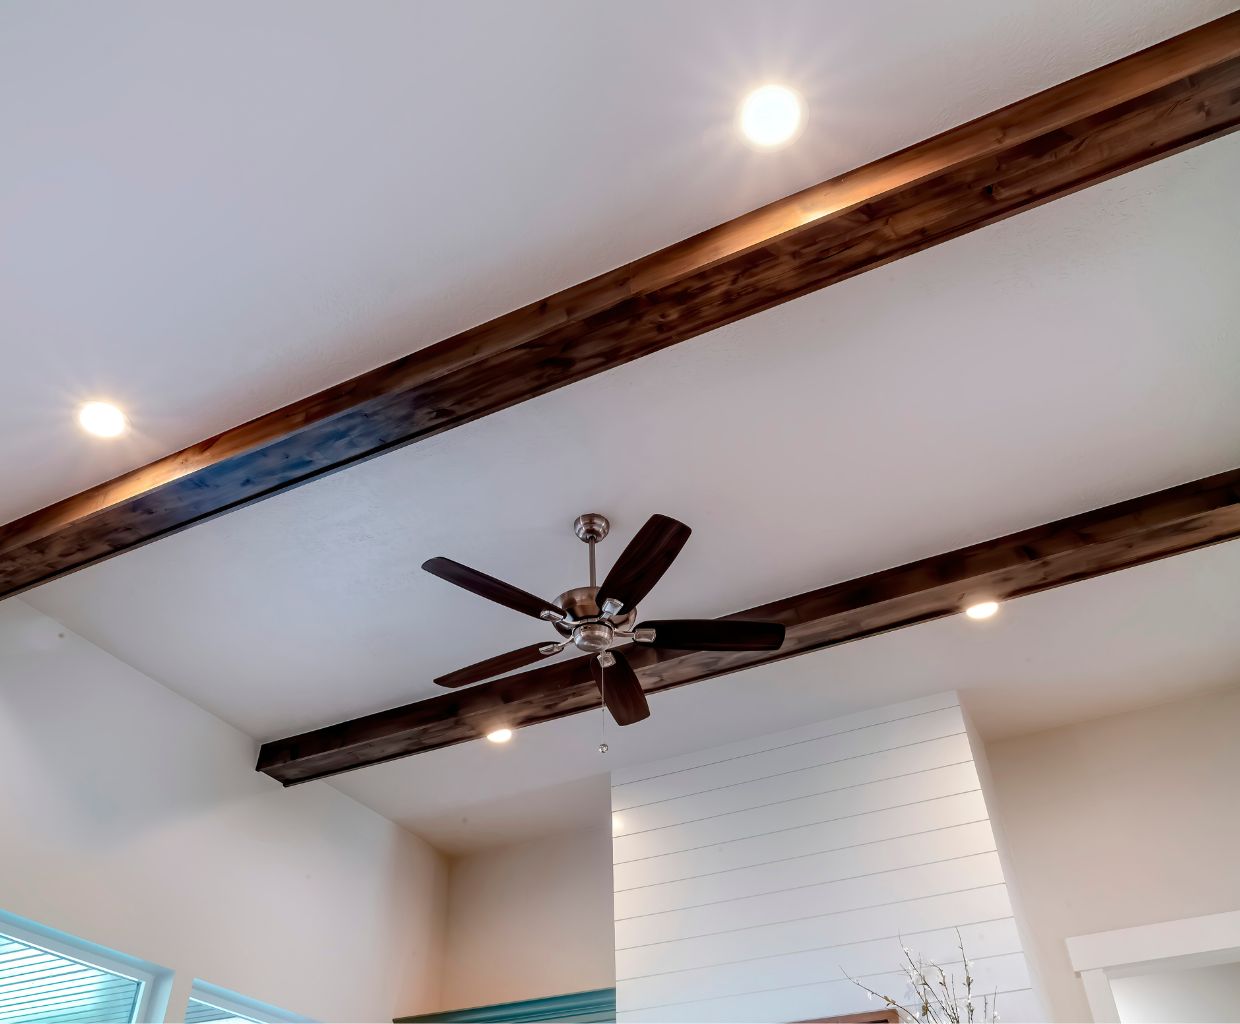 5 Ceiling Fans With High Airflow